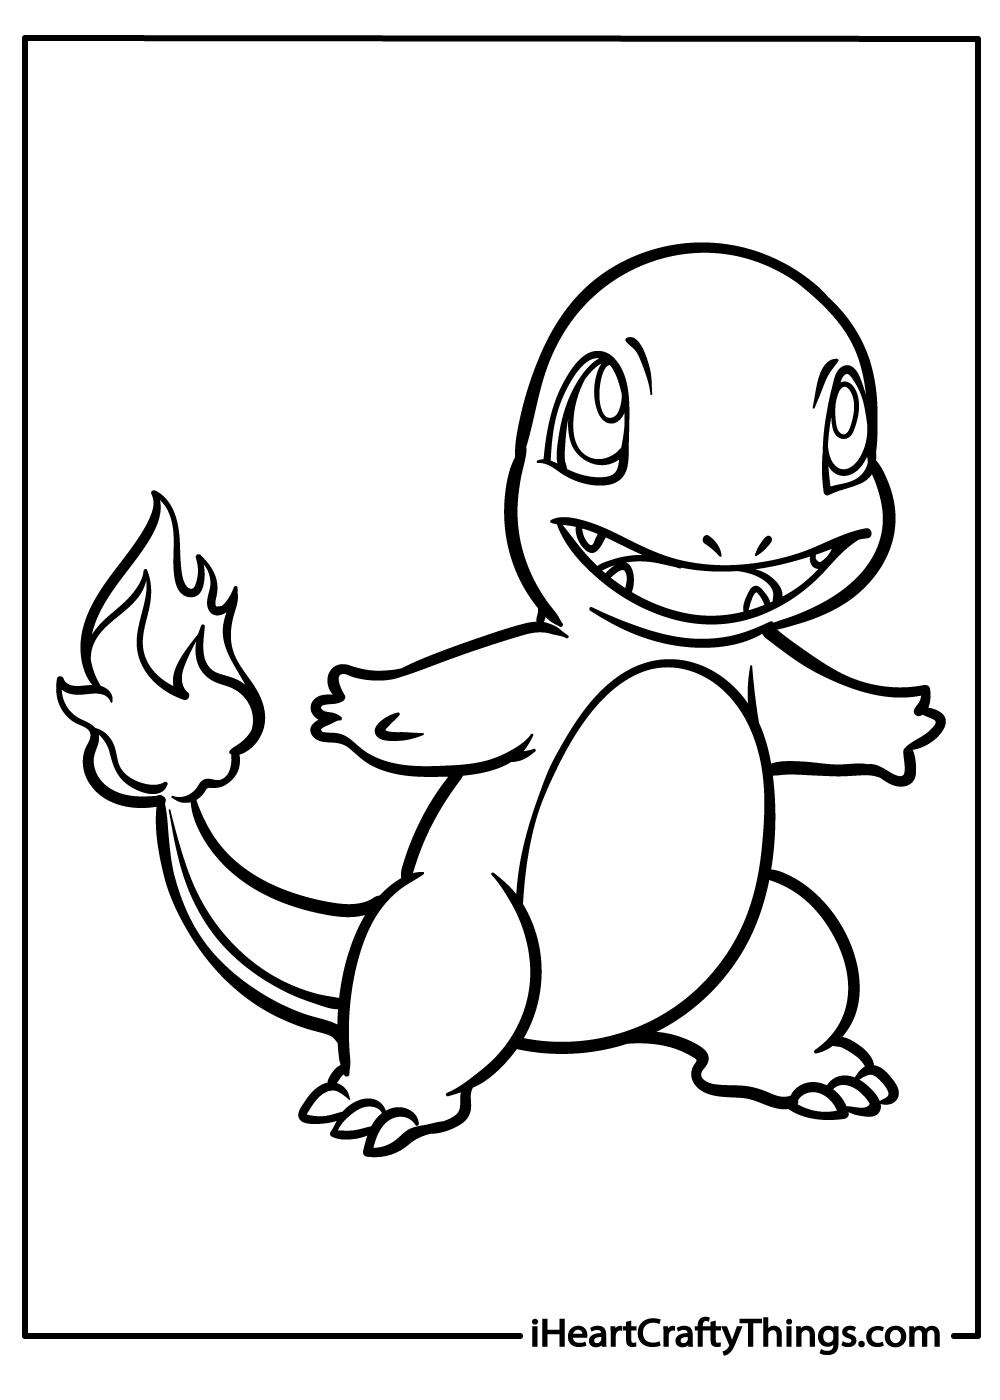 Charmander coloring pages for kids